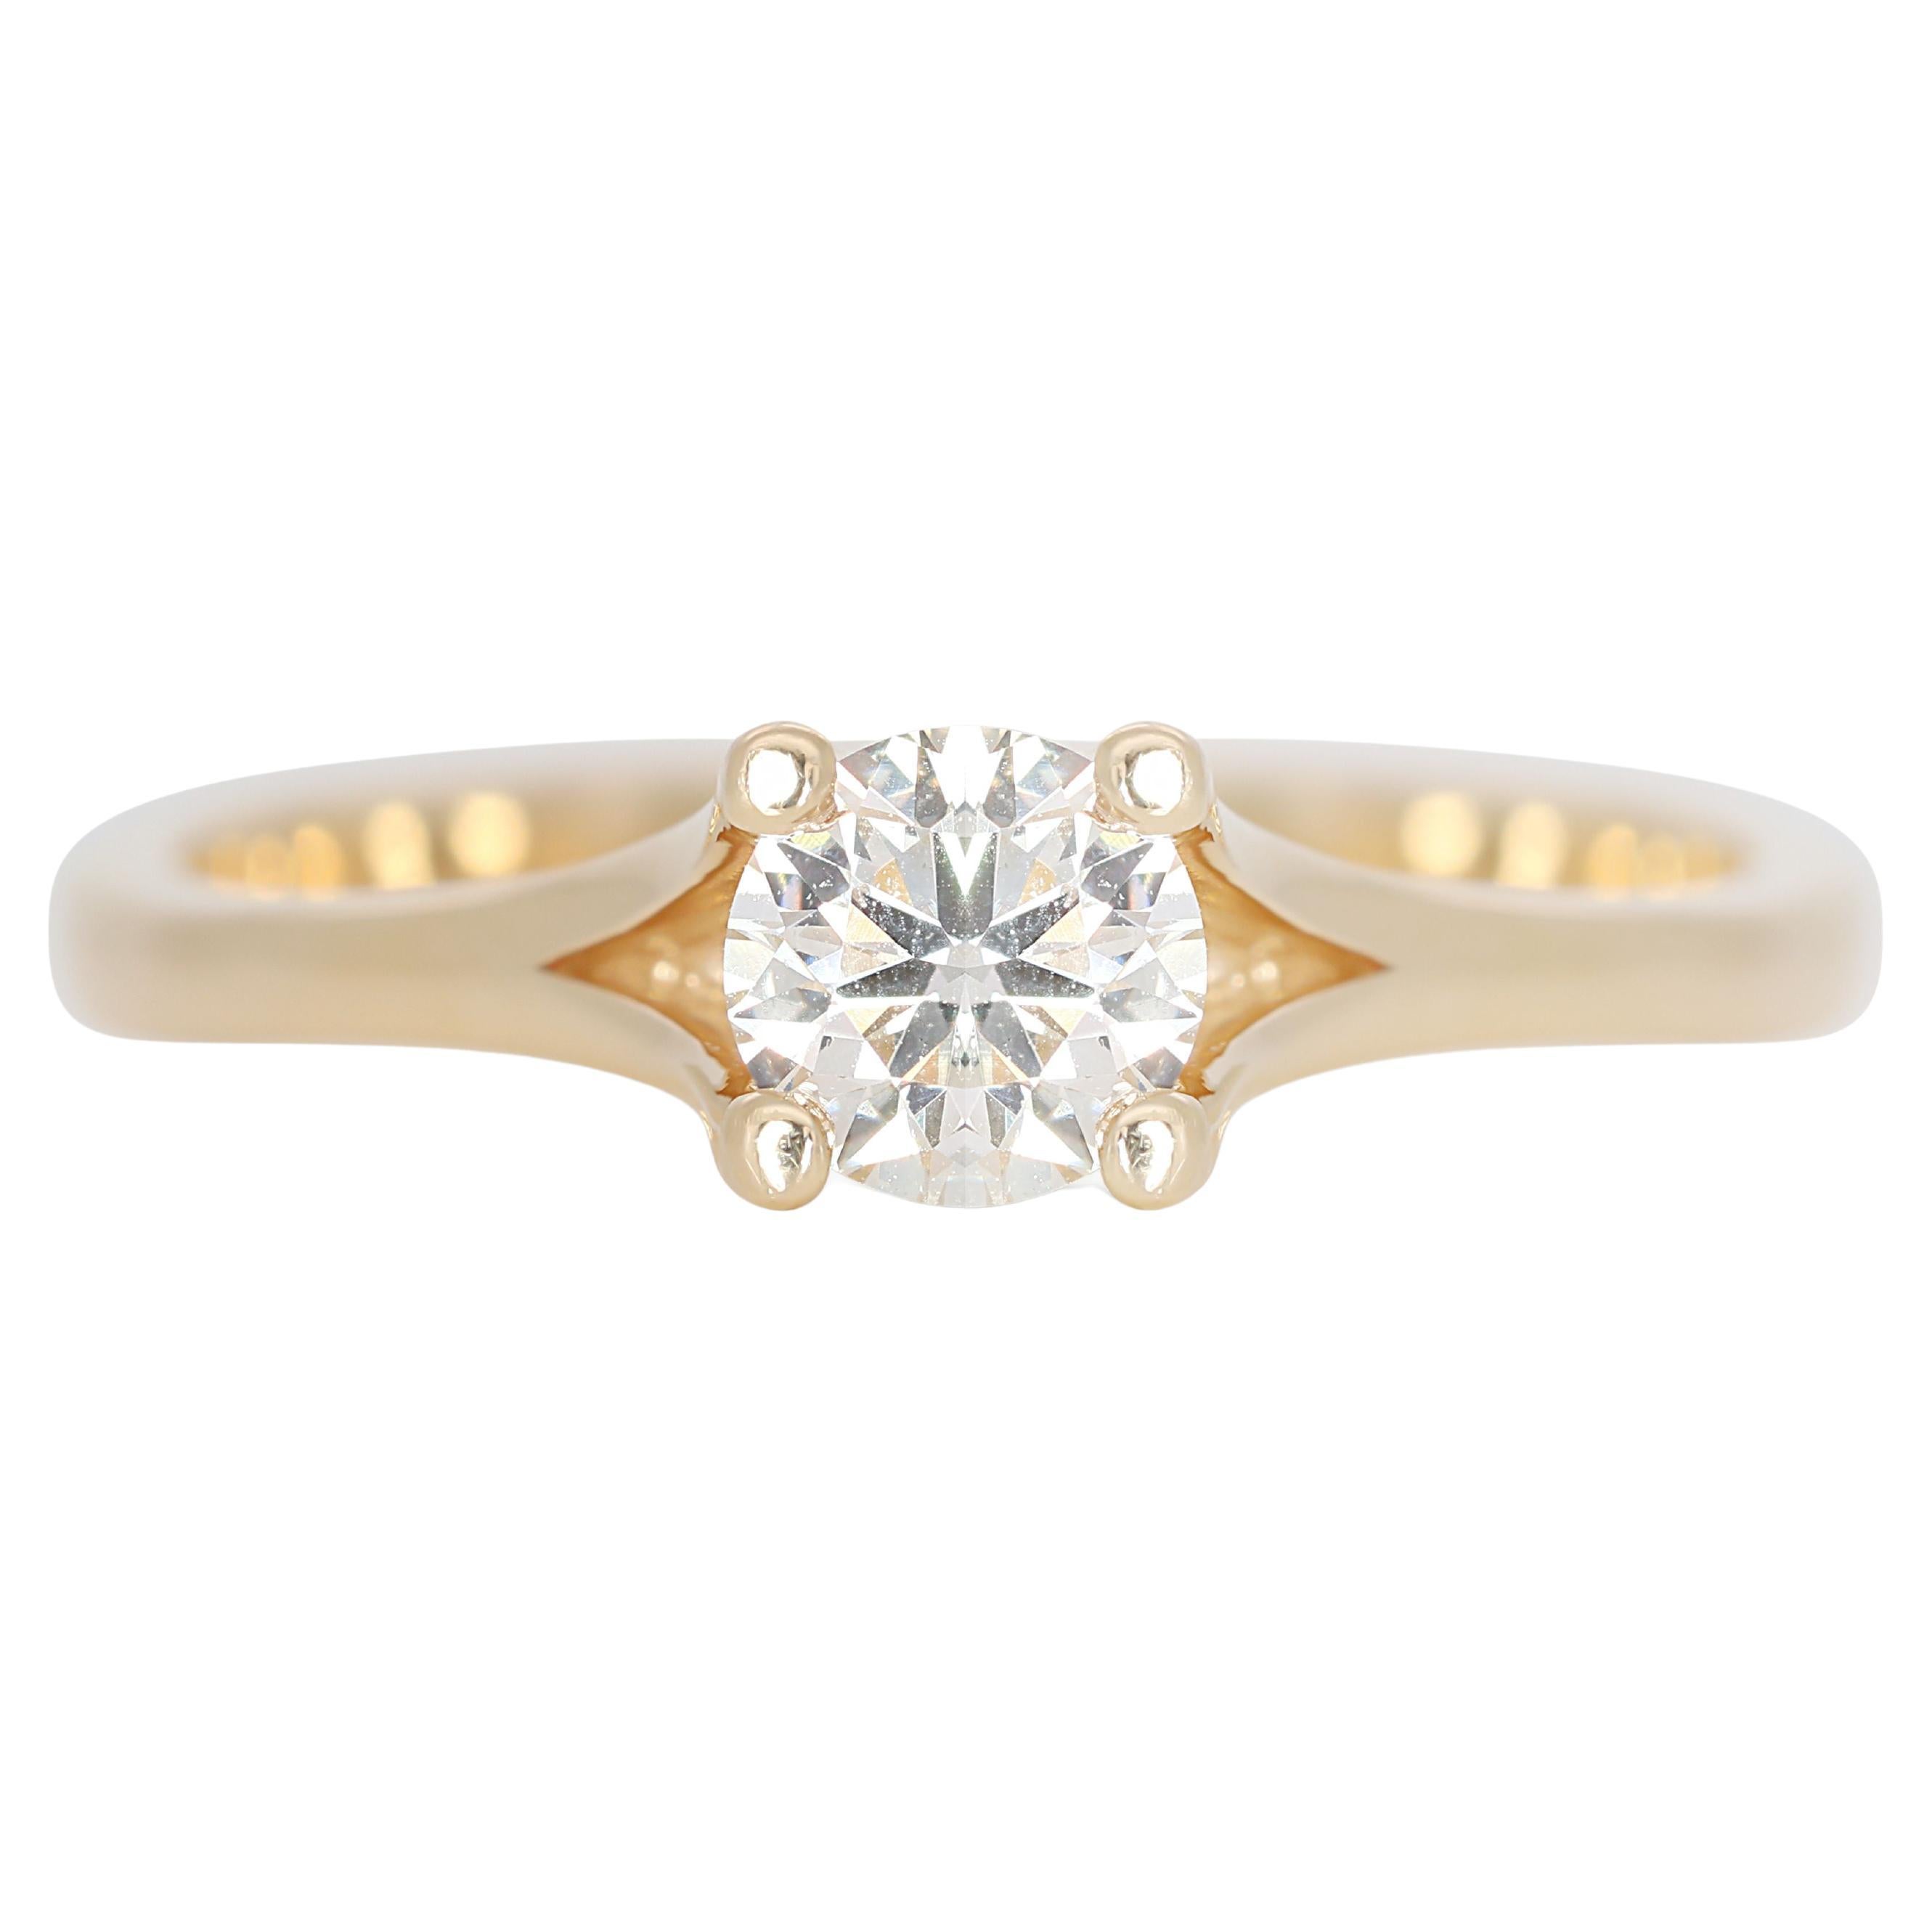 Enchanting Solitaire: 0.38 ct Diamond Shimmers in Warm 14K Gold For Sale